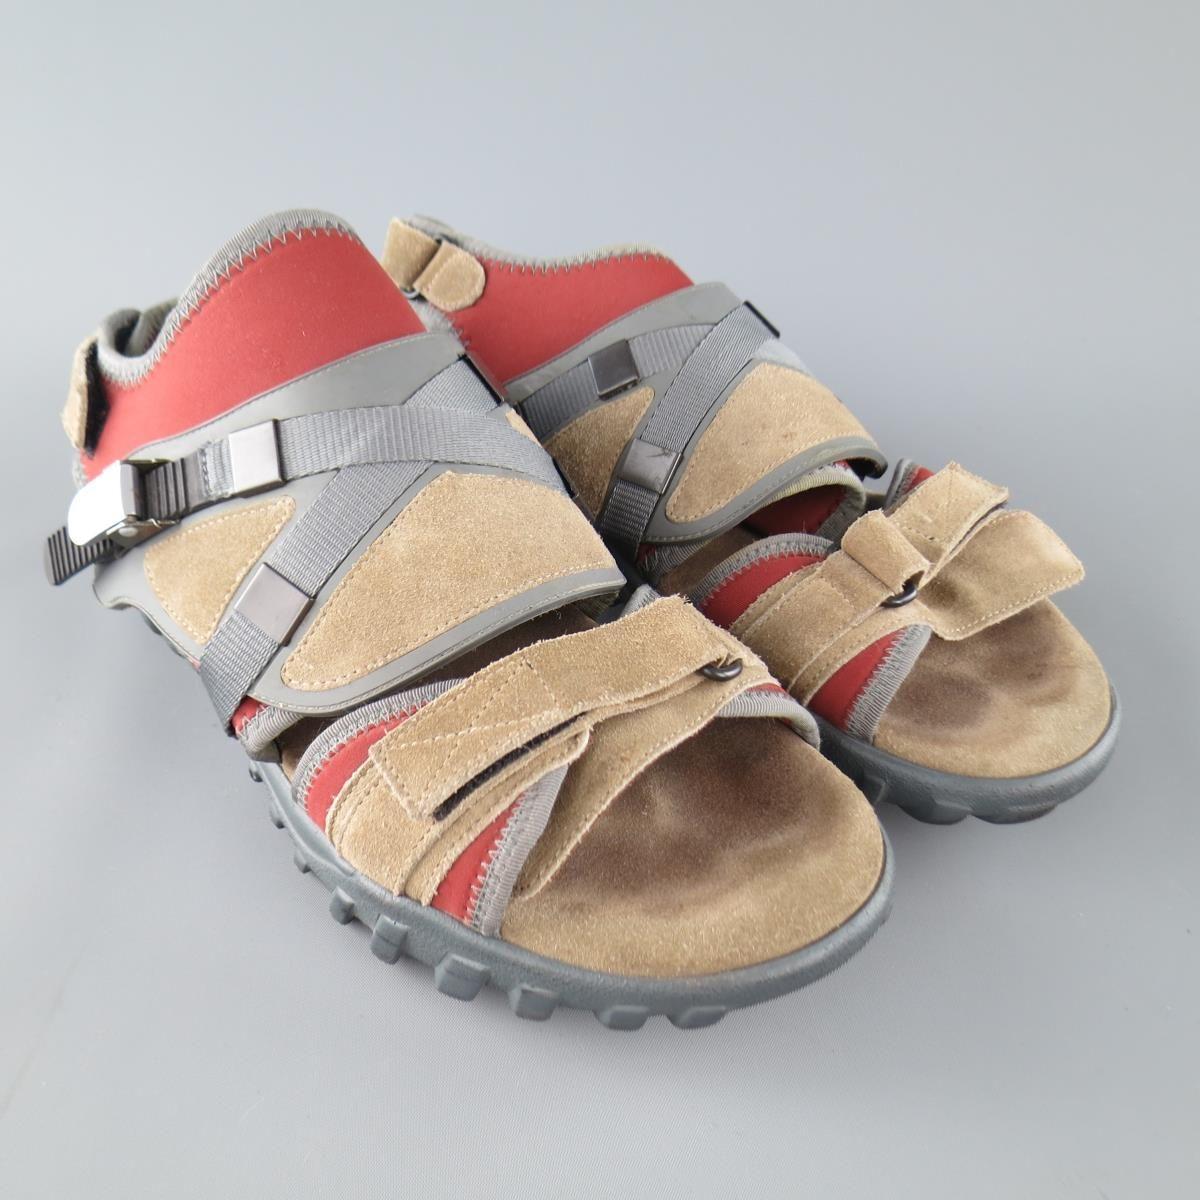 LANVIN athletic sandals consists of suede, neoprene and rubber material in a neutral tone. Detailed with front adjustable straps around the front and mid-section of foot, as well hook and loop-strap around the back heel. Suede accents of taupe are